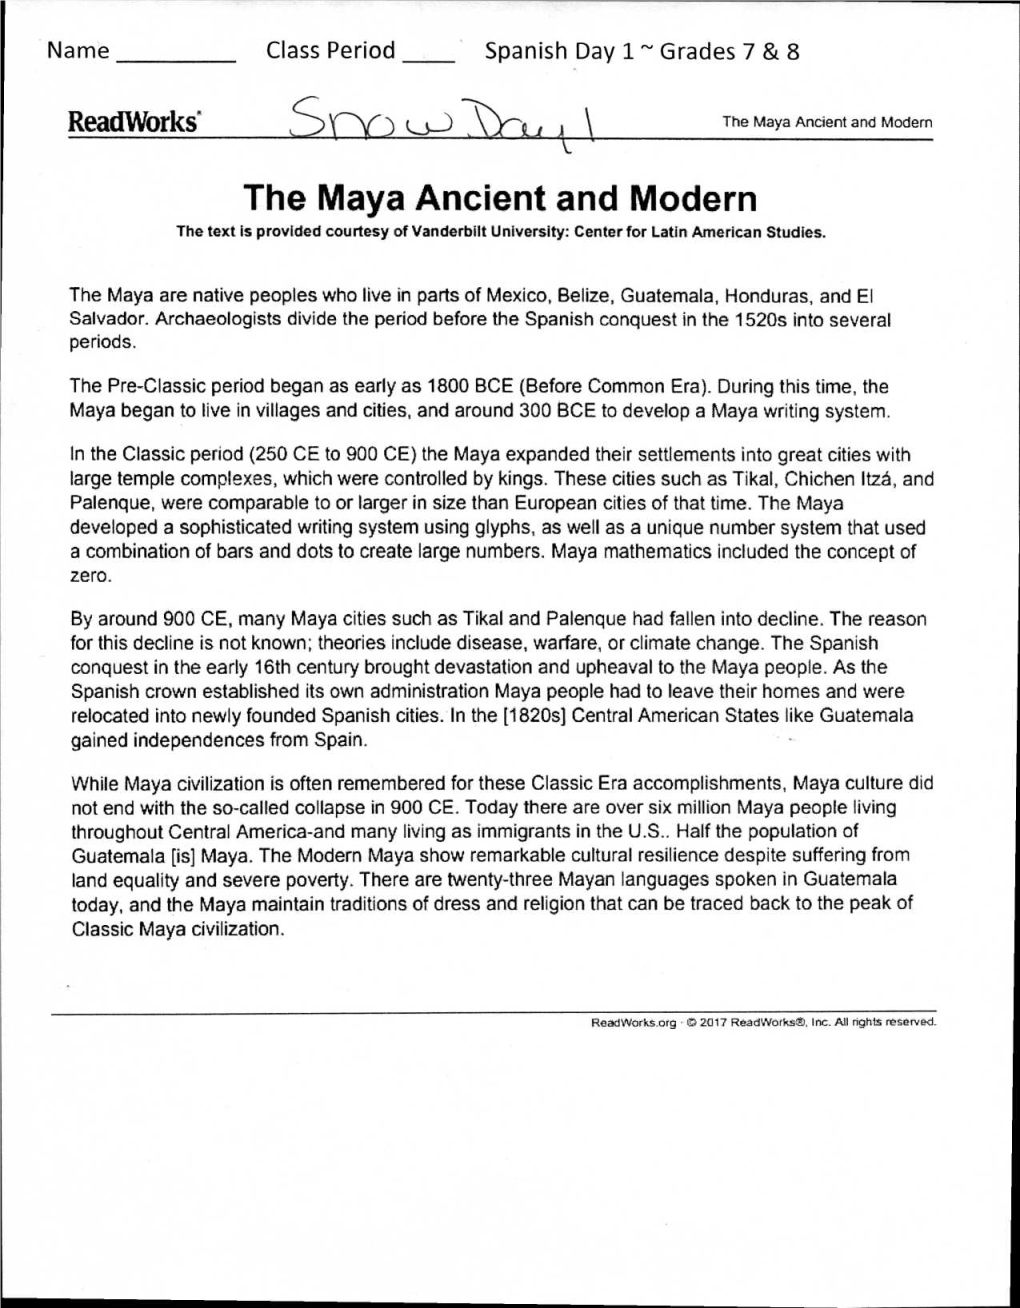 The Maya Ancient and Modern the Text Is Provided Courtesy of Vanderbilt University: Center for Latin American Studies